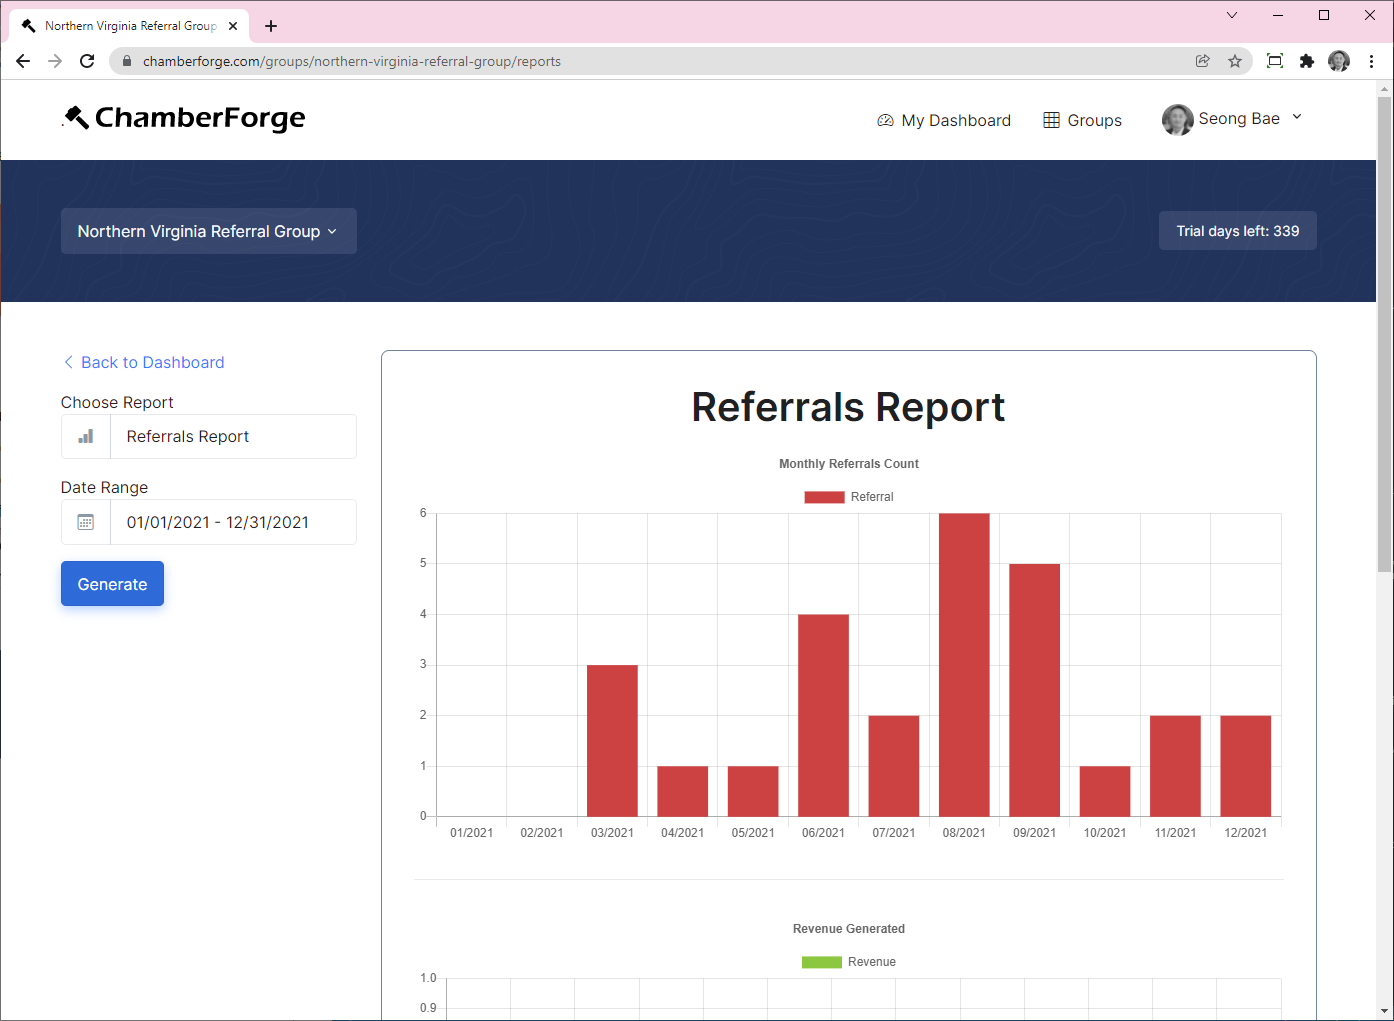 ChamberForge Group Referrals Report